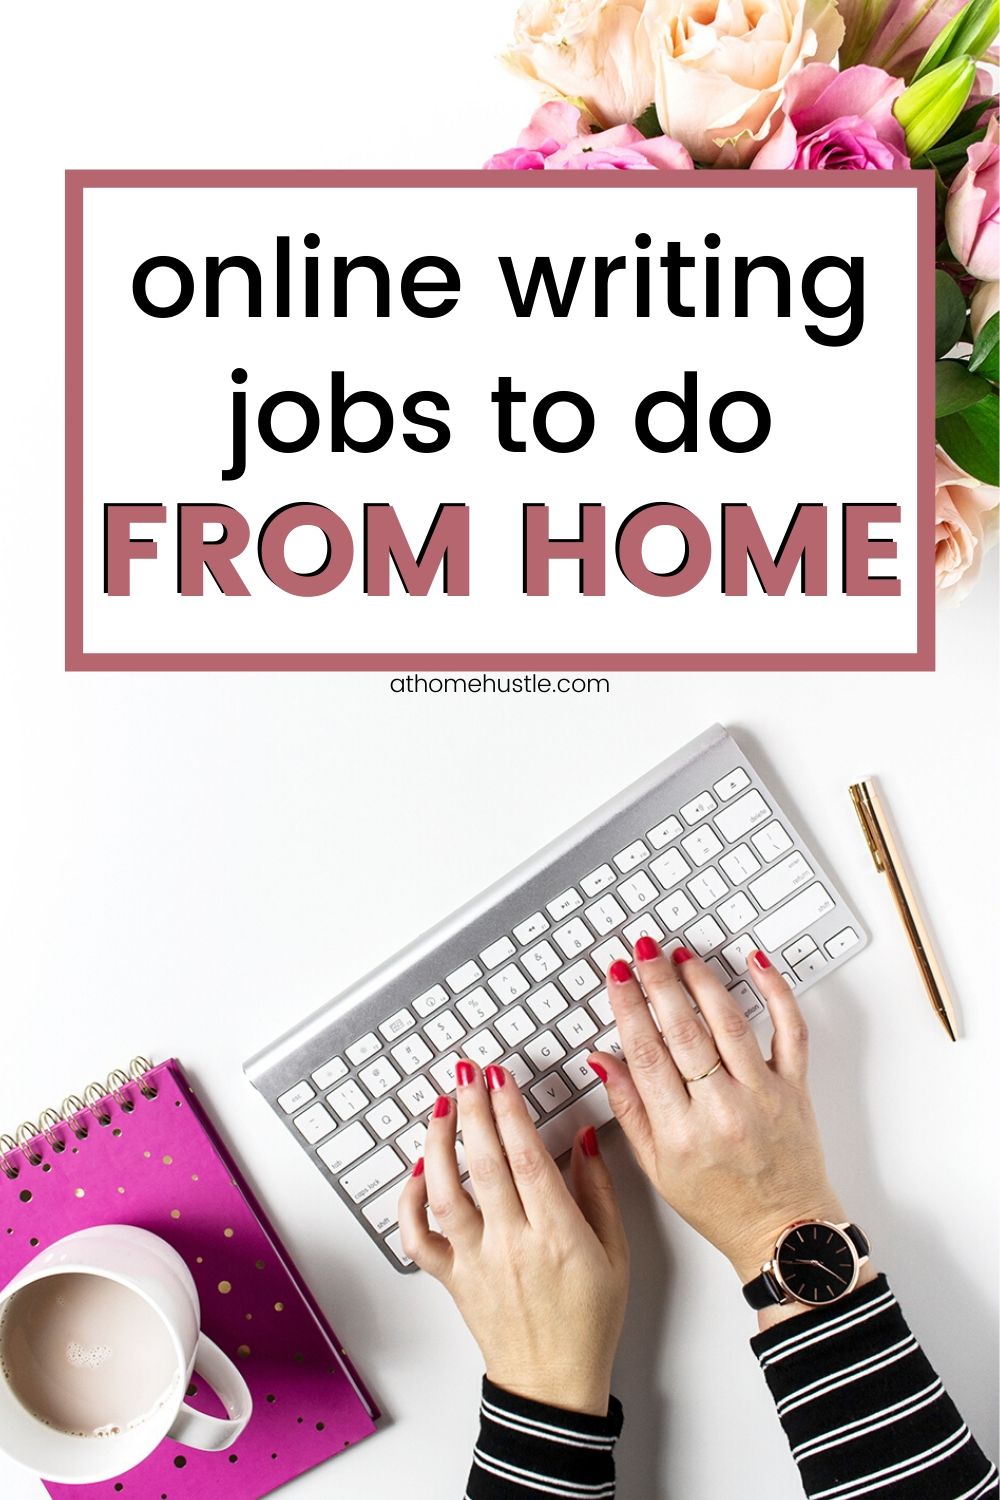 how to do content writing jobs